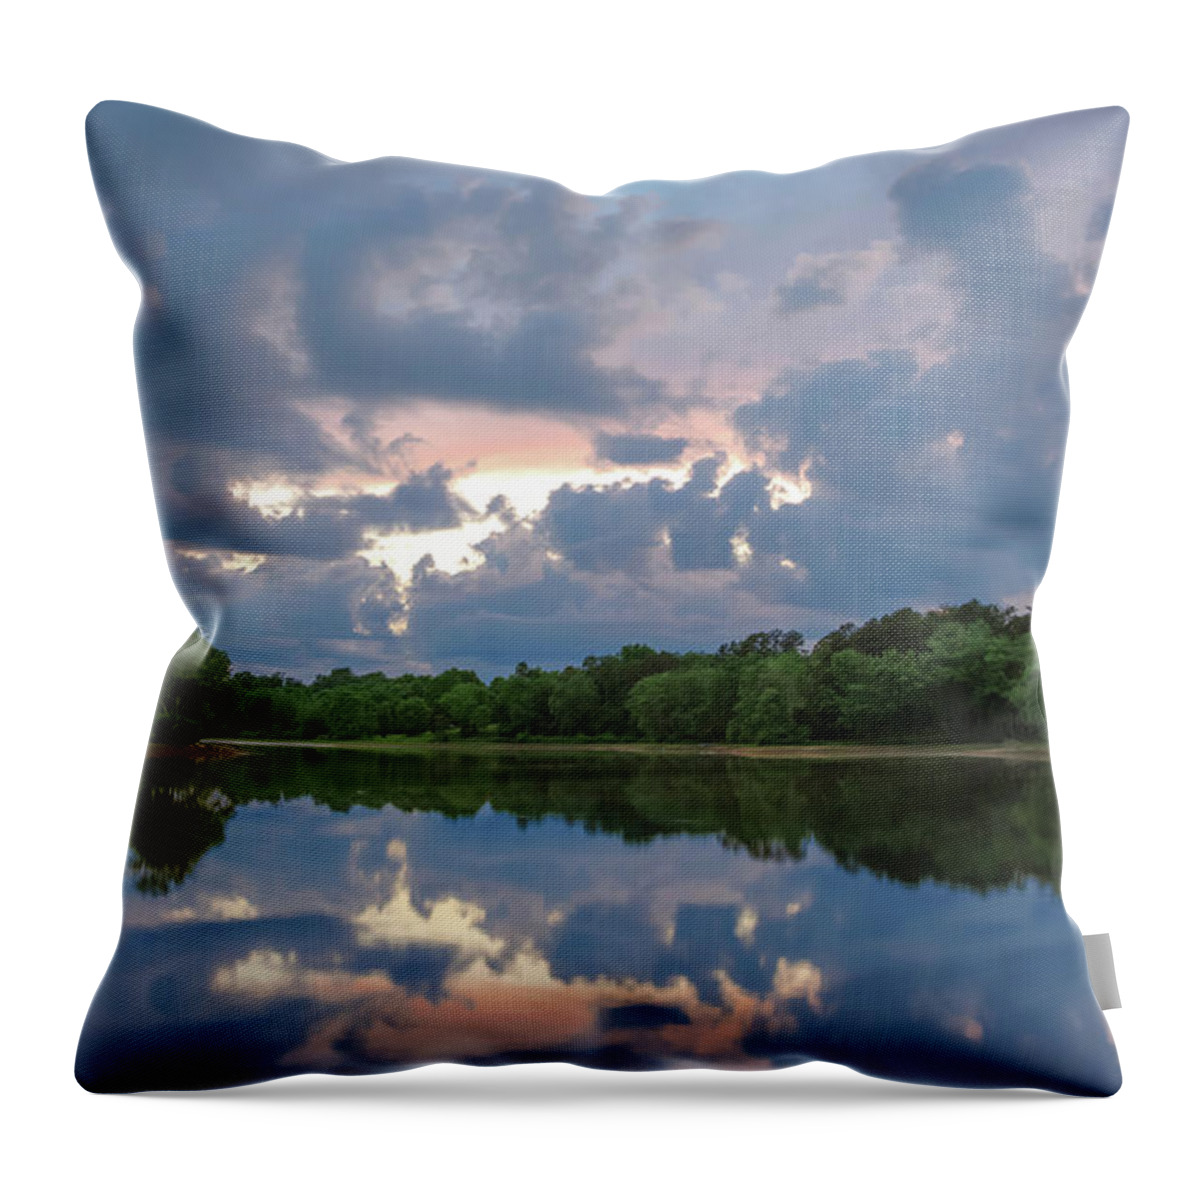 K-1 Throw Pillow featuring the photograph Sunset Reflections by Lori Coleman